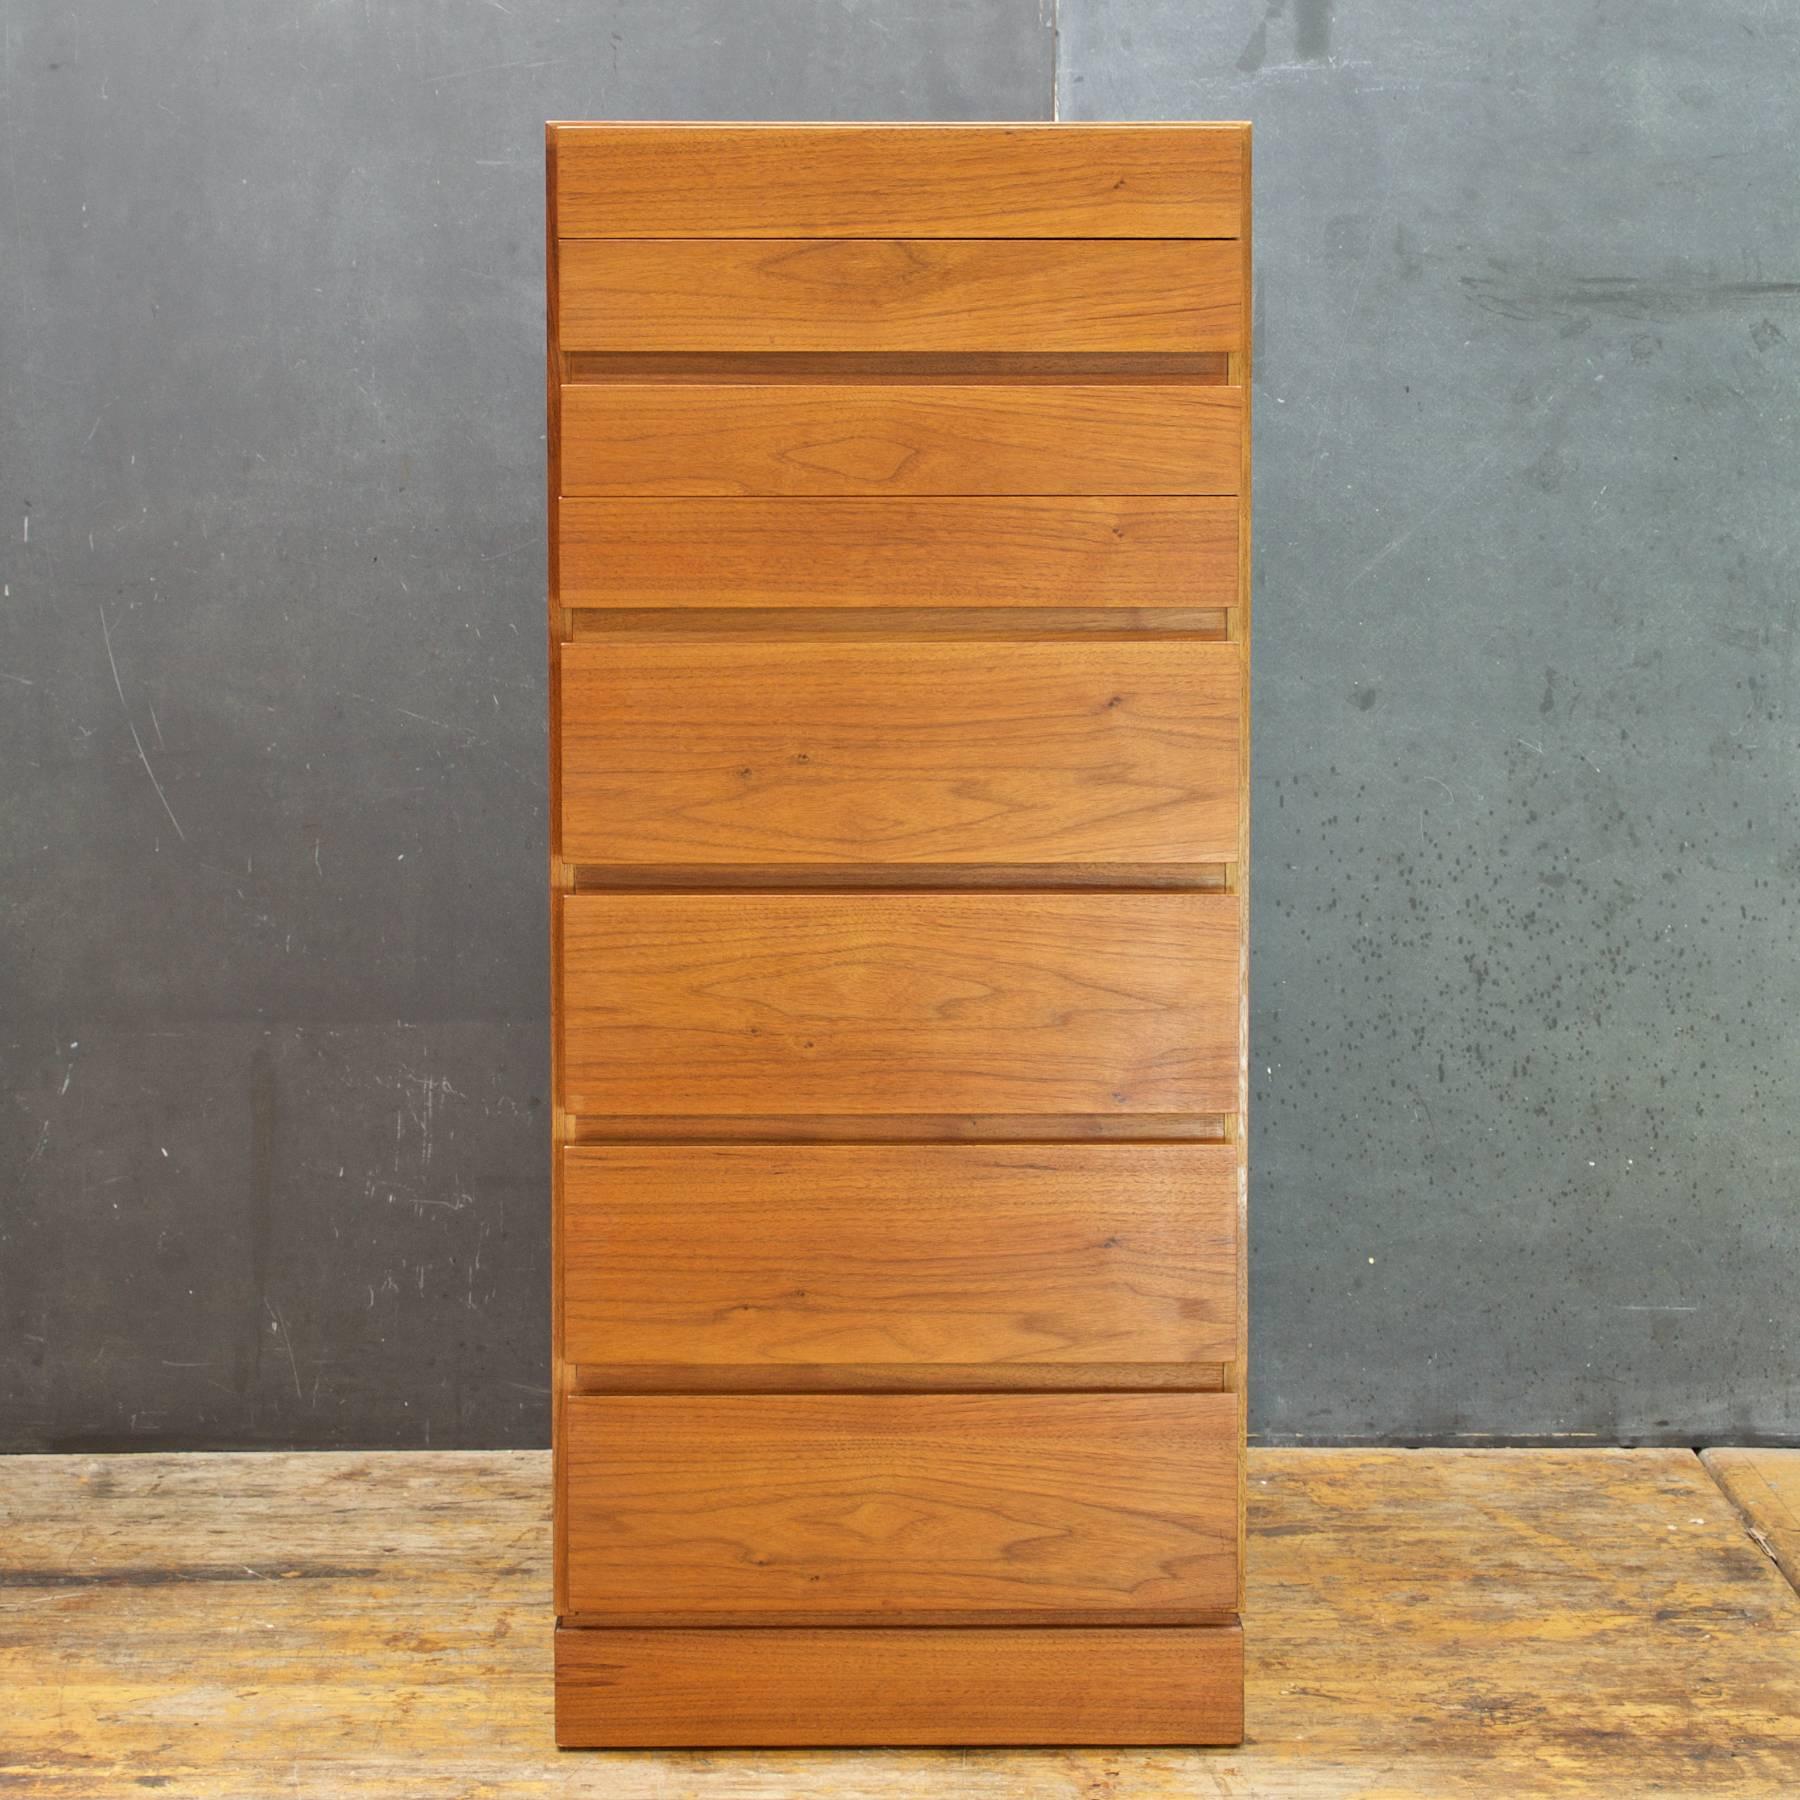 Minimalist Danish designed teak tall lingerie chest of drawers. Rare form, clean and smoothly functioning. For affordable NYC delivery quotes please message.